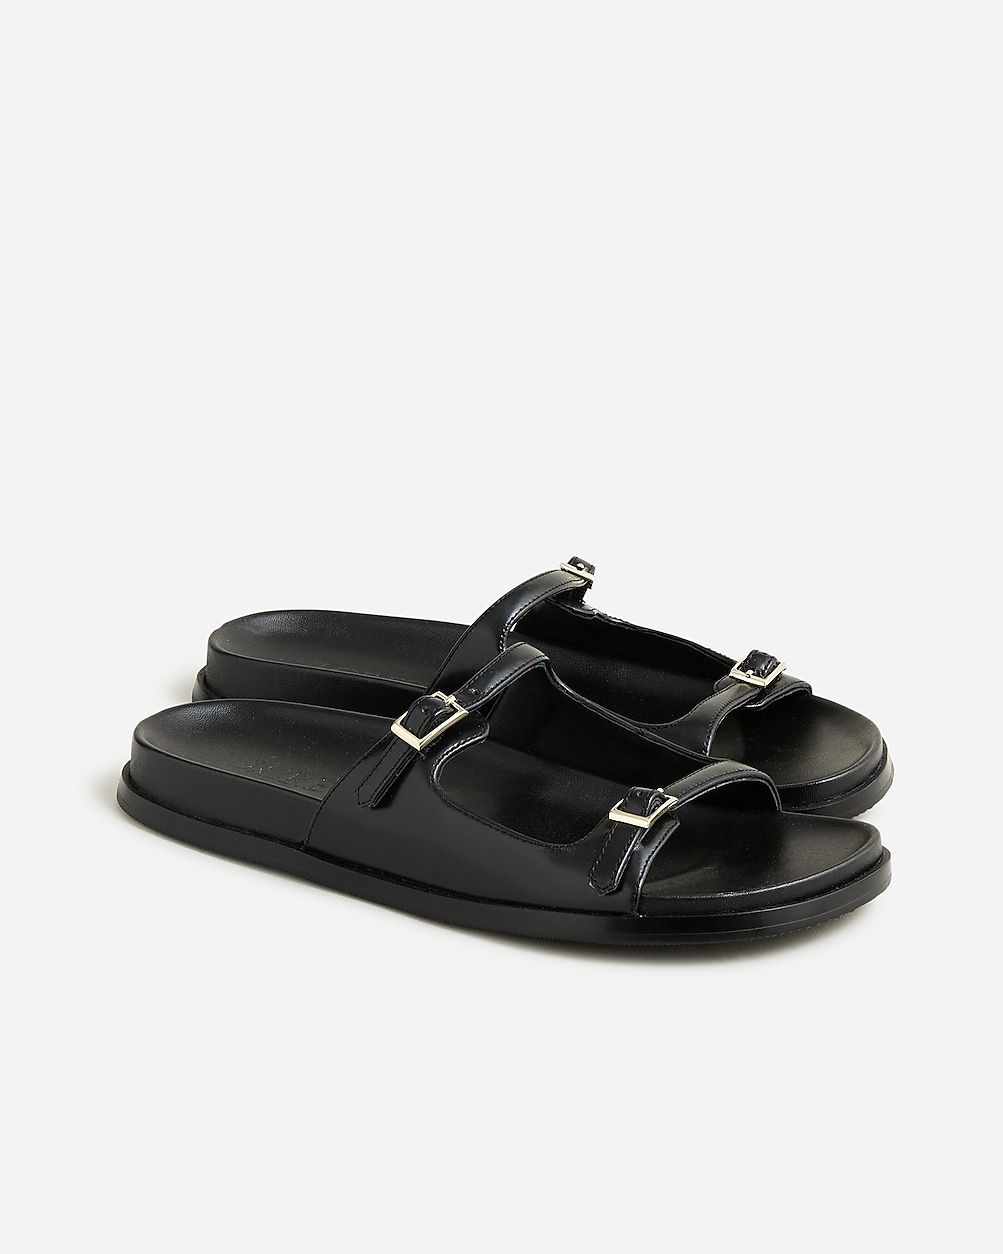 best seller4.1(14 REVIEWS)Colbie buckle sandals in leather$198.00Black$228.00$198.00Select a size... | J.Crew US